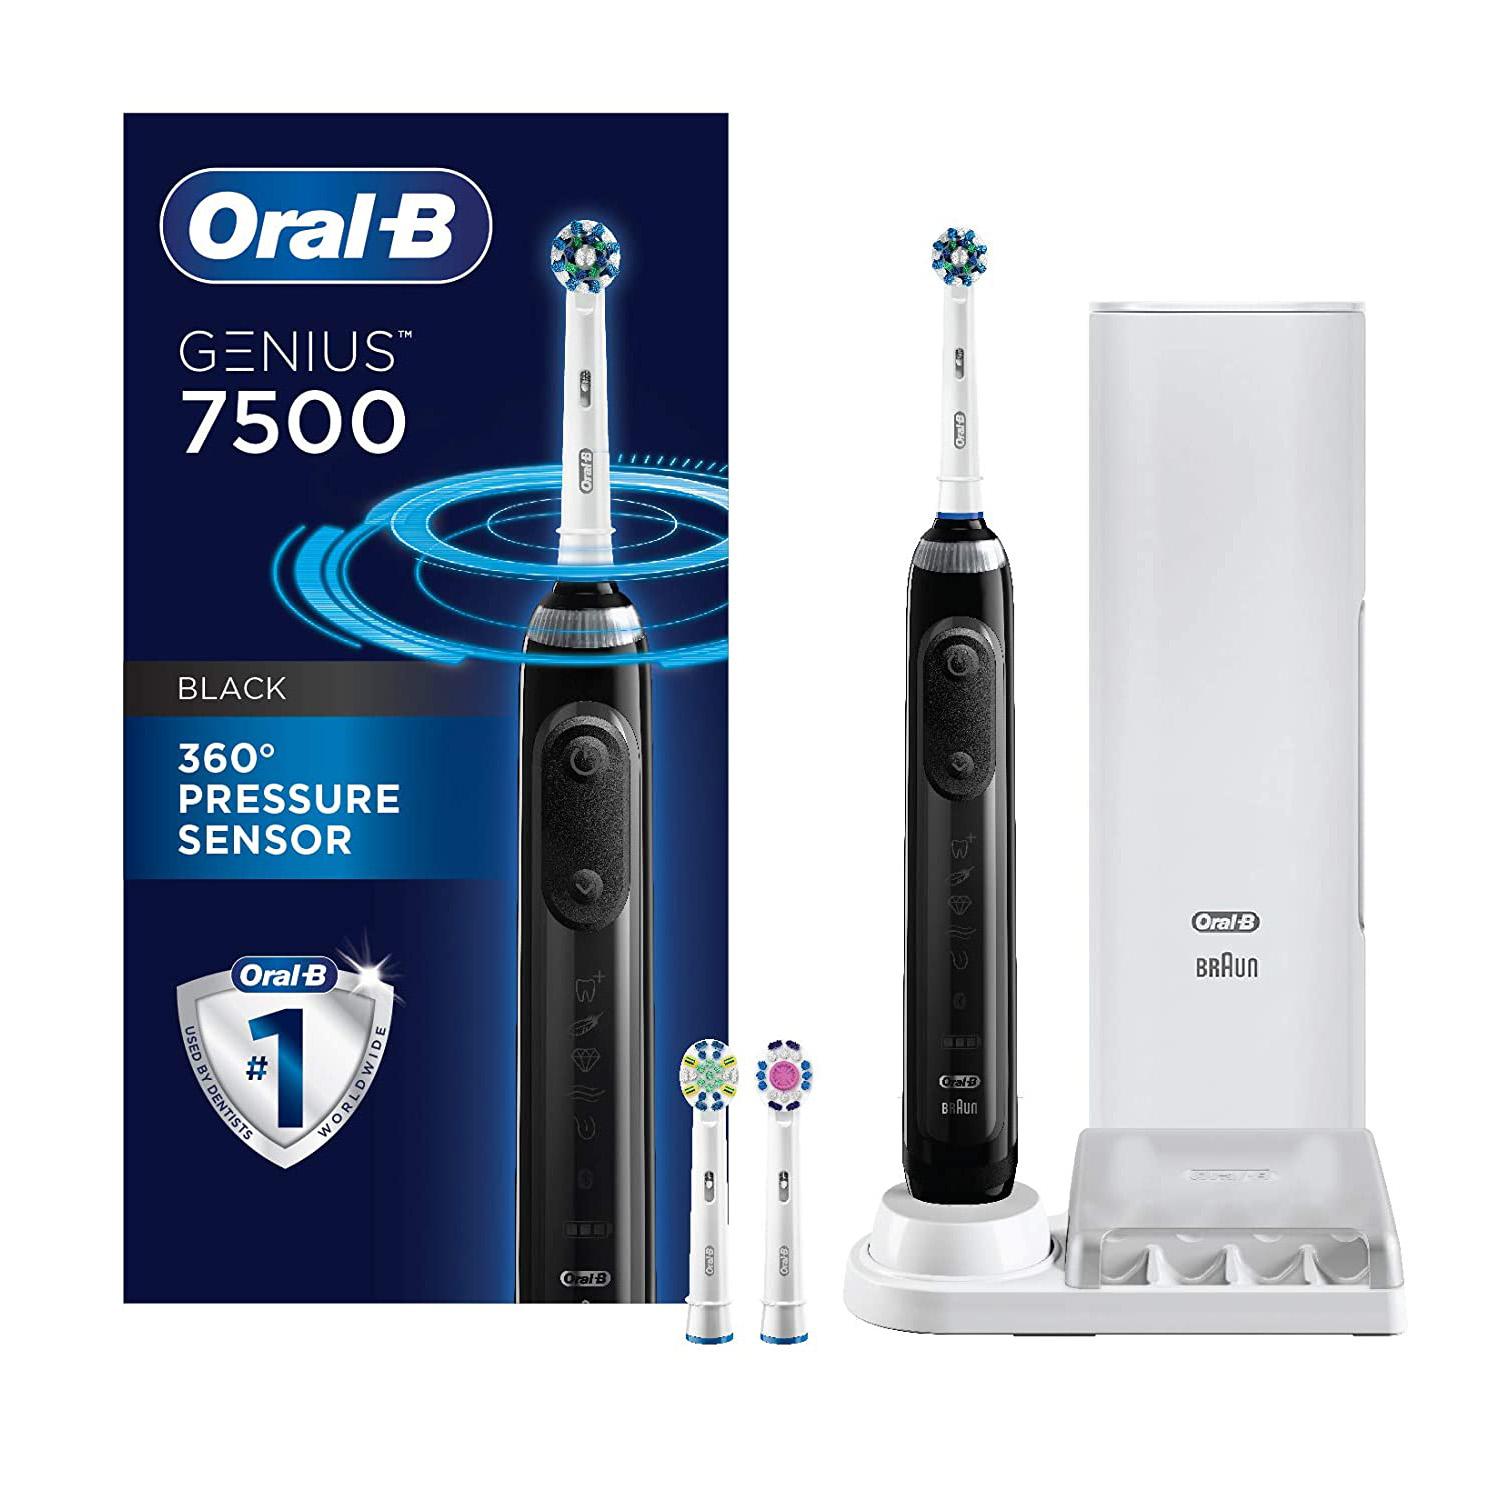 Oral-B Pro 7500 SmartSeries Electric Toothbrush with 3 Brush Heads for $74.94 Shipped